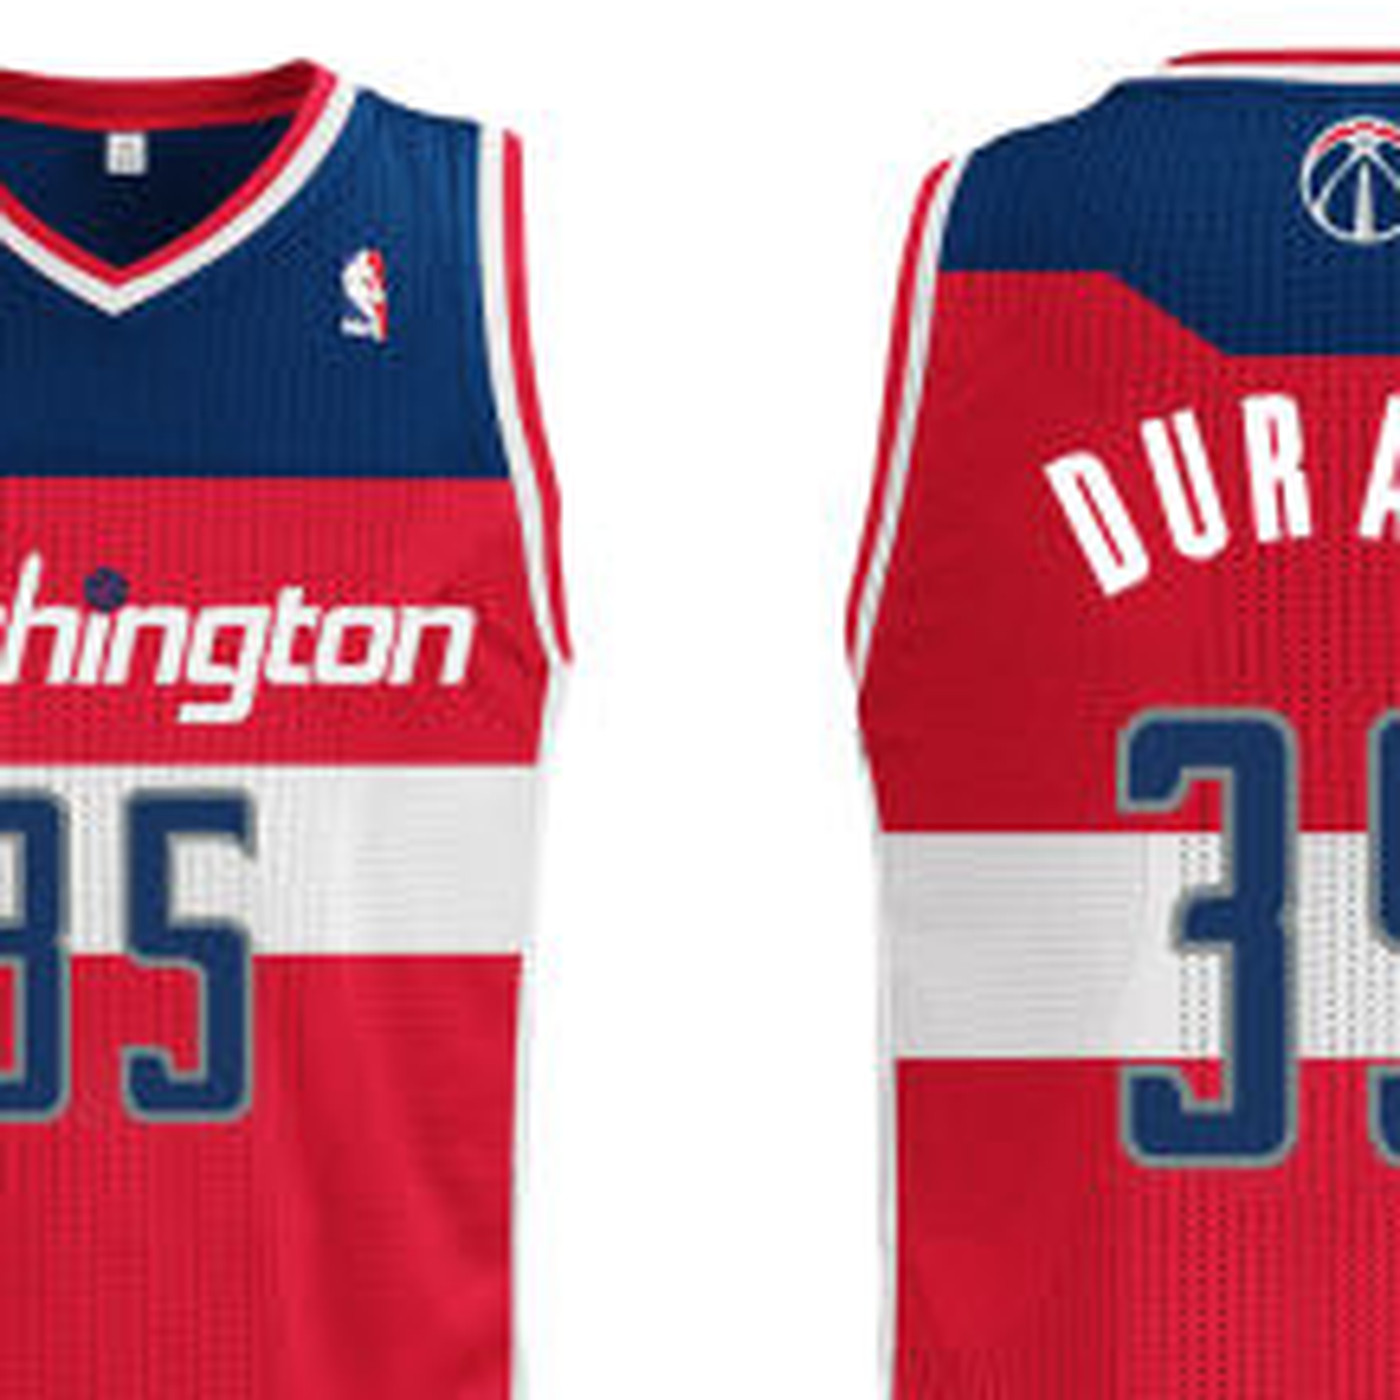 kevin durant wizards jersey